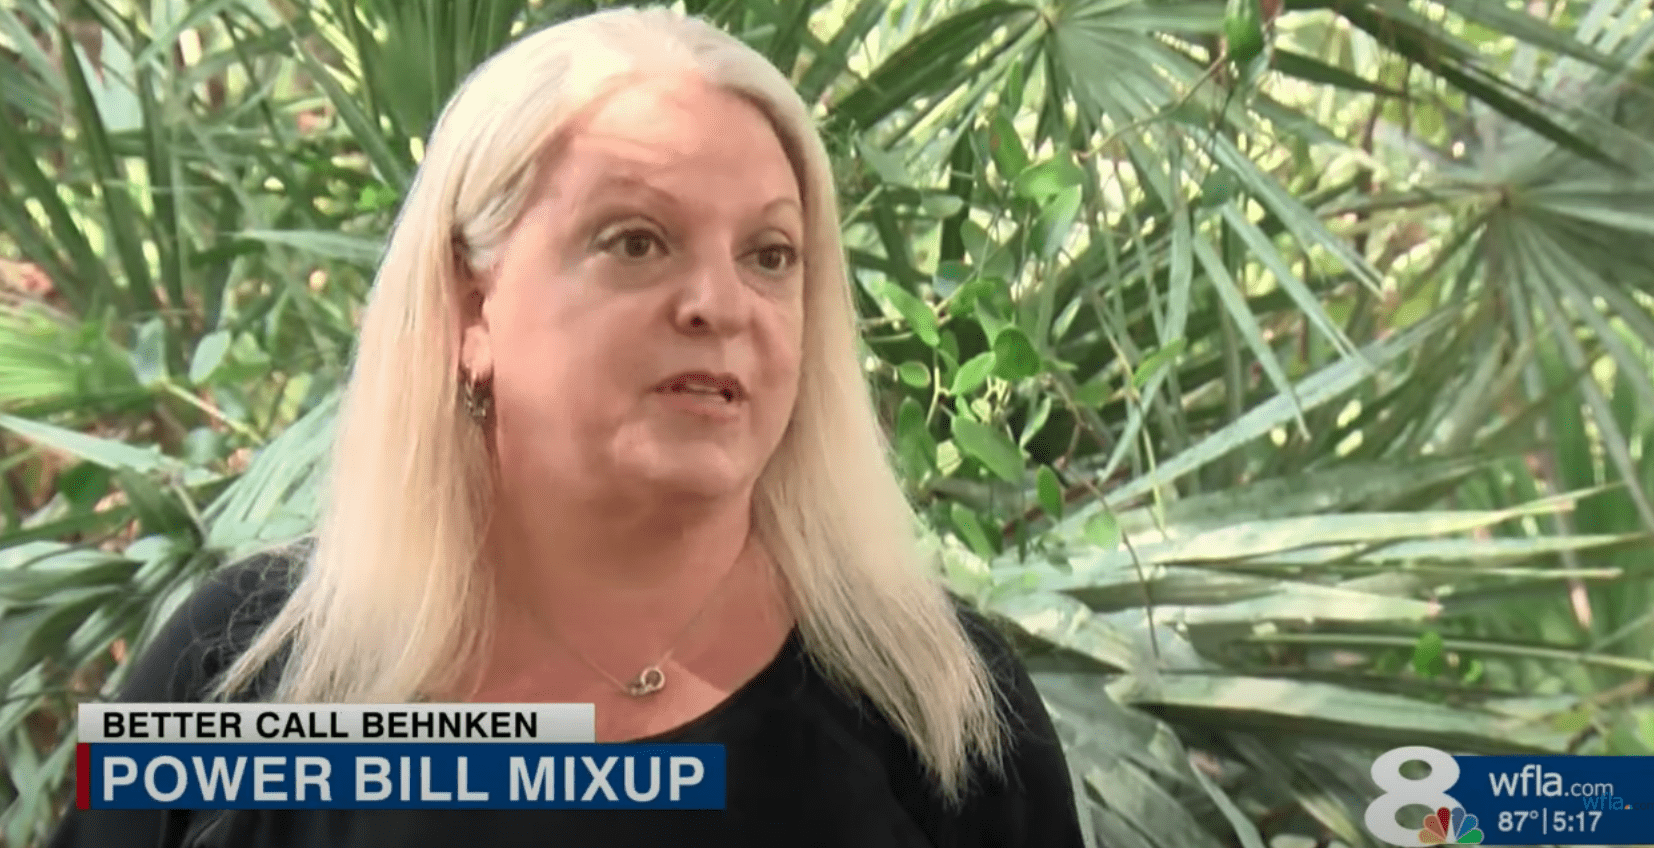 Woman shares that her mother's account was debited incorrectly and as a result they struggled to pay all of her living expenses | Photo: Youtube/WFLA News Channel 8